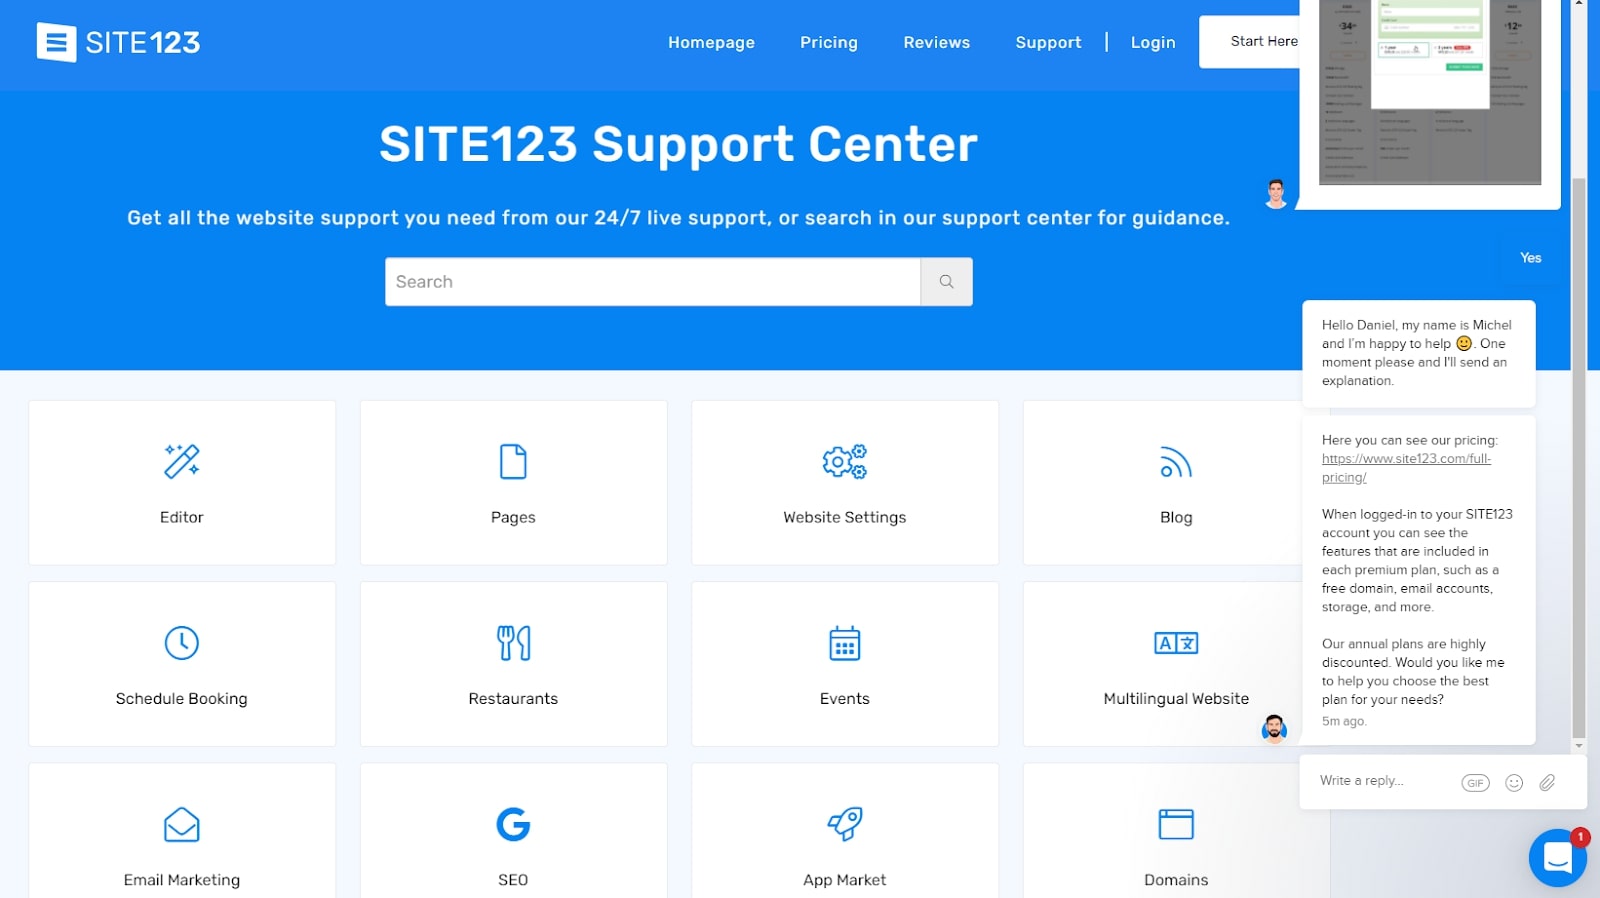 Site 123 Support Center Web Page.